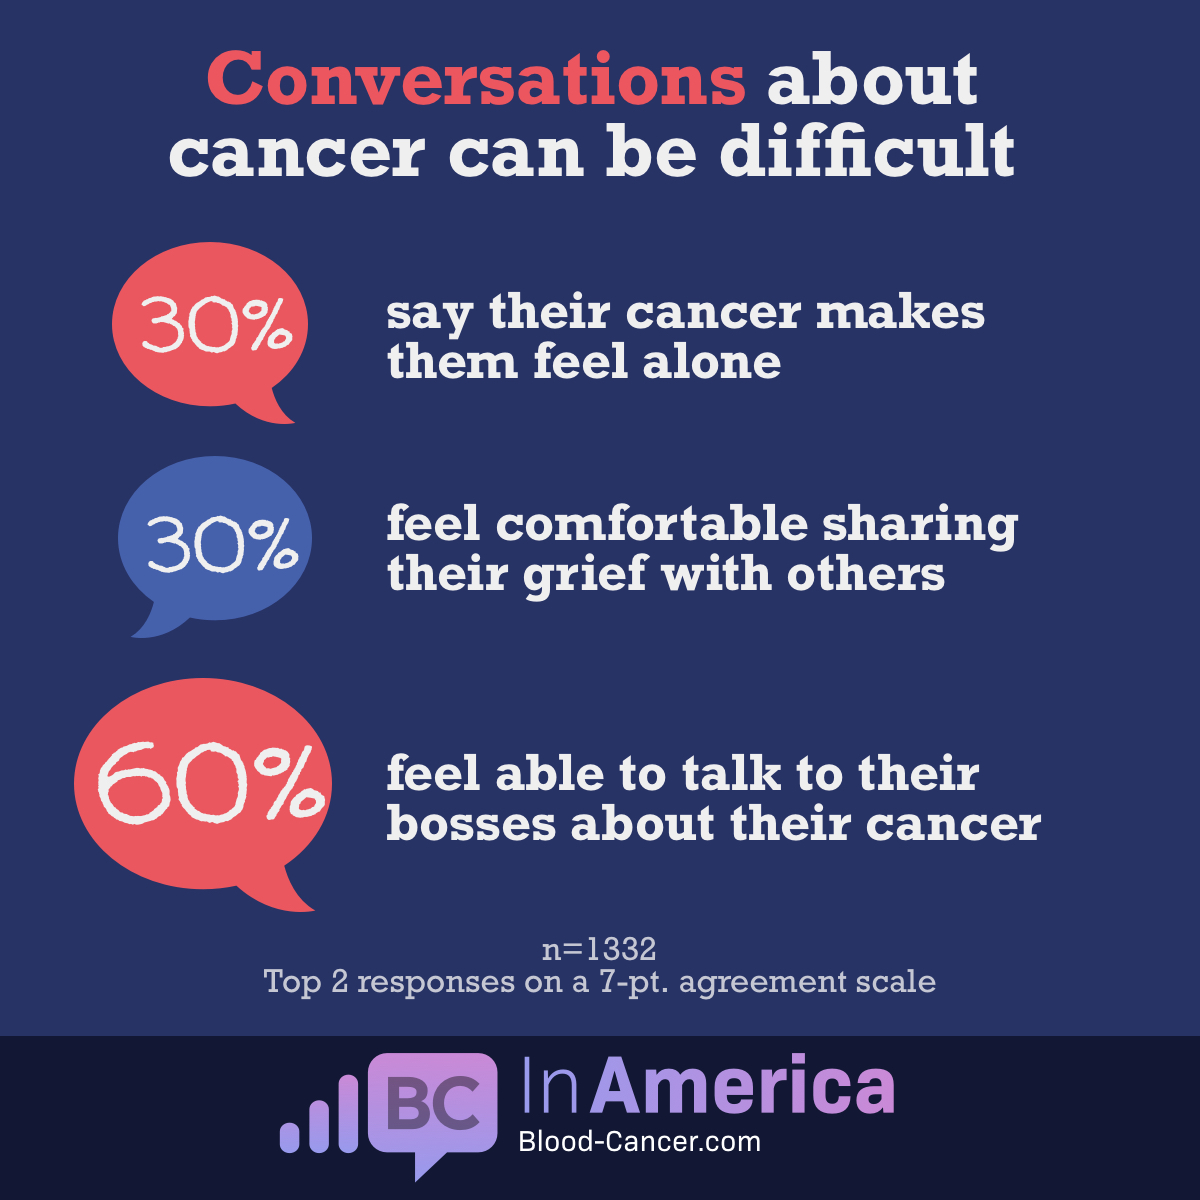 Text: Conversations about cancer can be difficult. 30% say cancer makes them feel alone. 30% comfortable sharing their grief. 60% able to talk to bosses. 